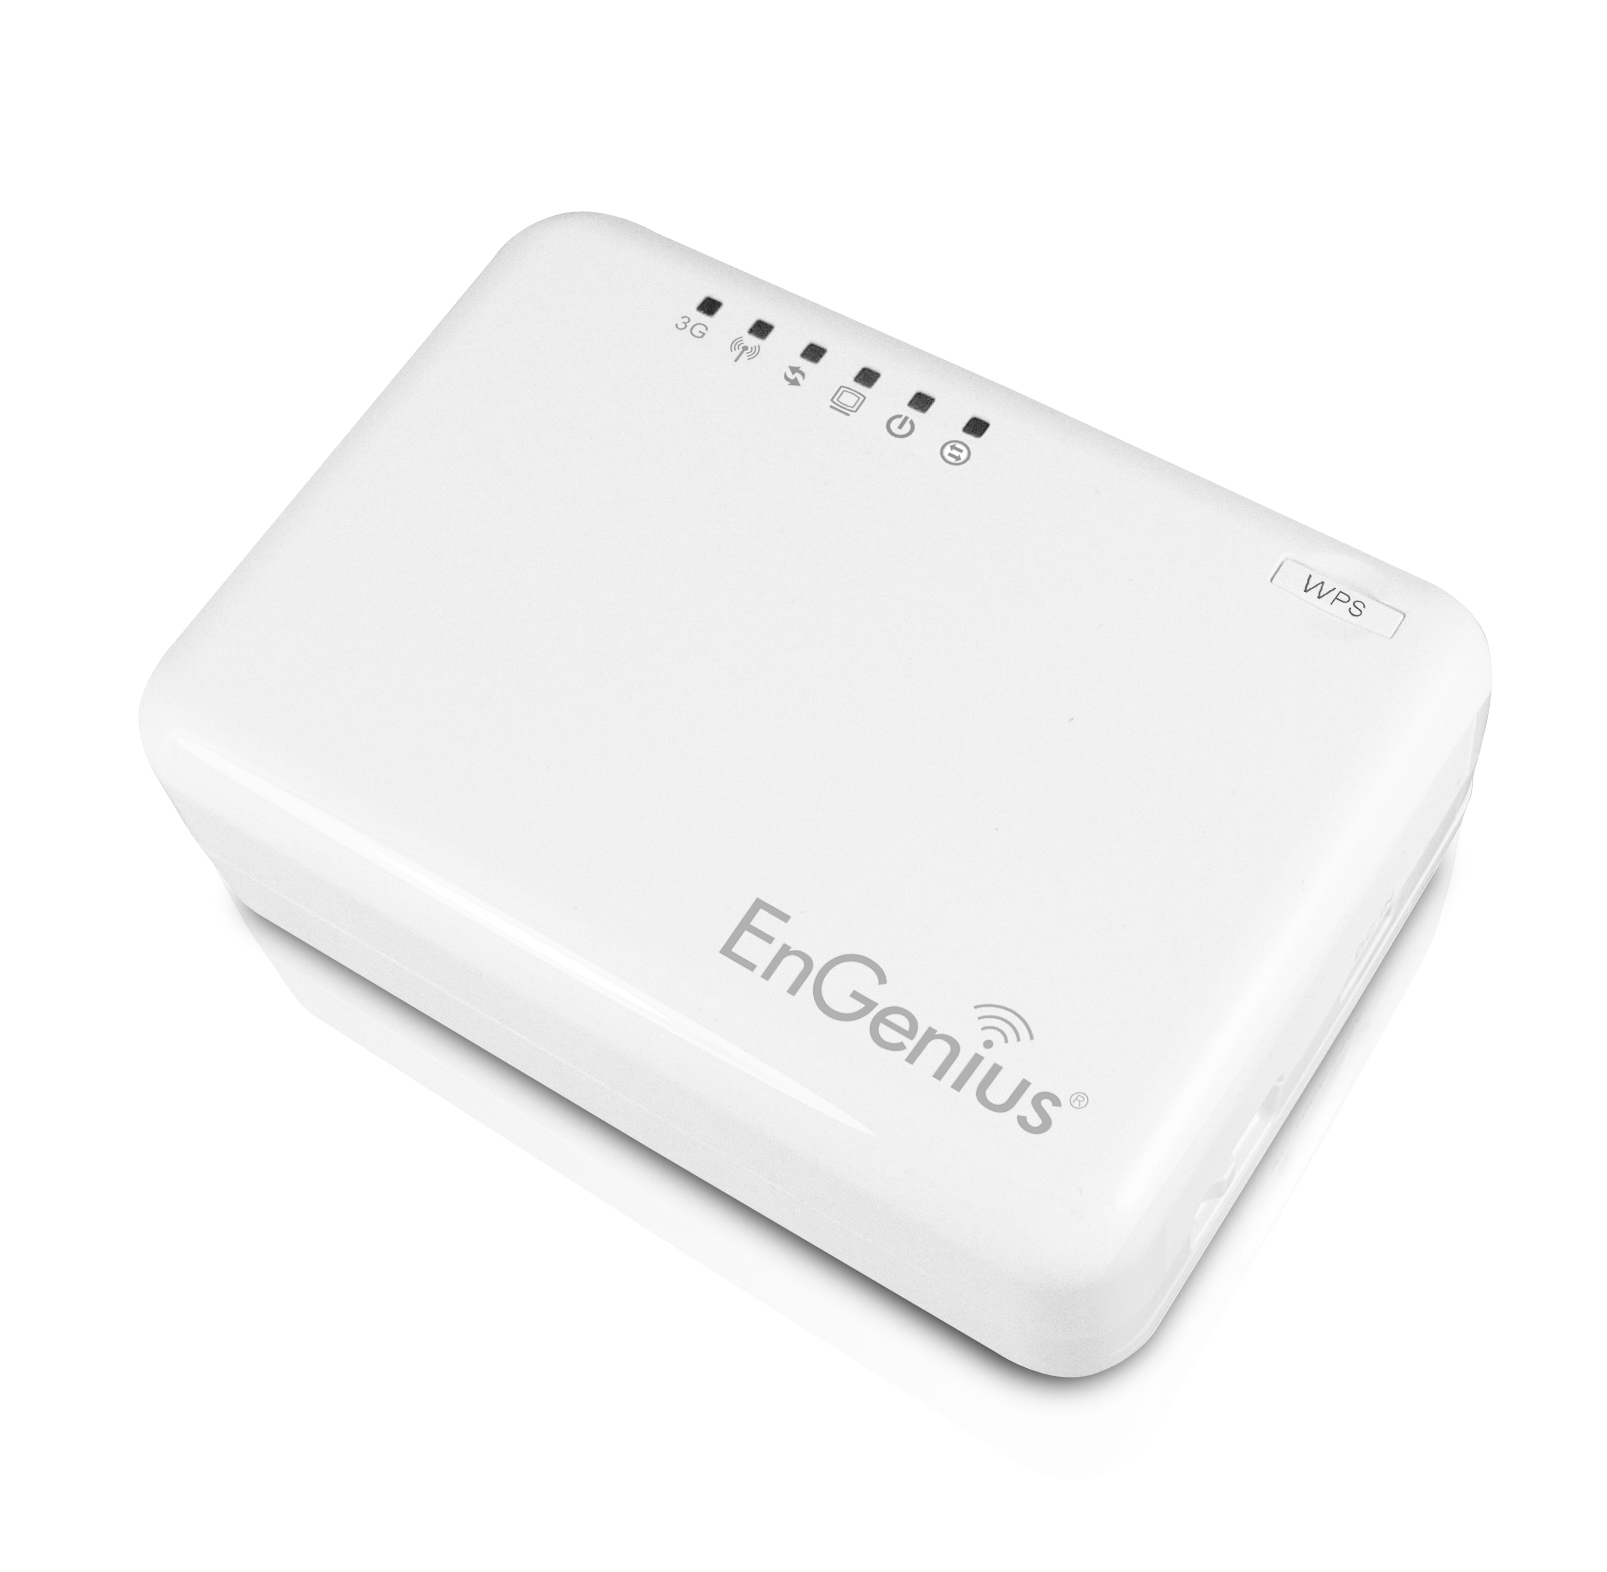 EnGenius ETR9360 3G 150Mbps Battery Powered Router